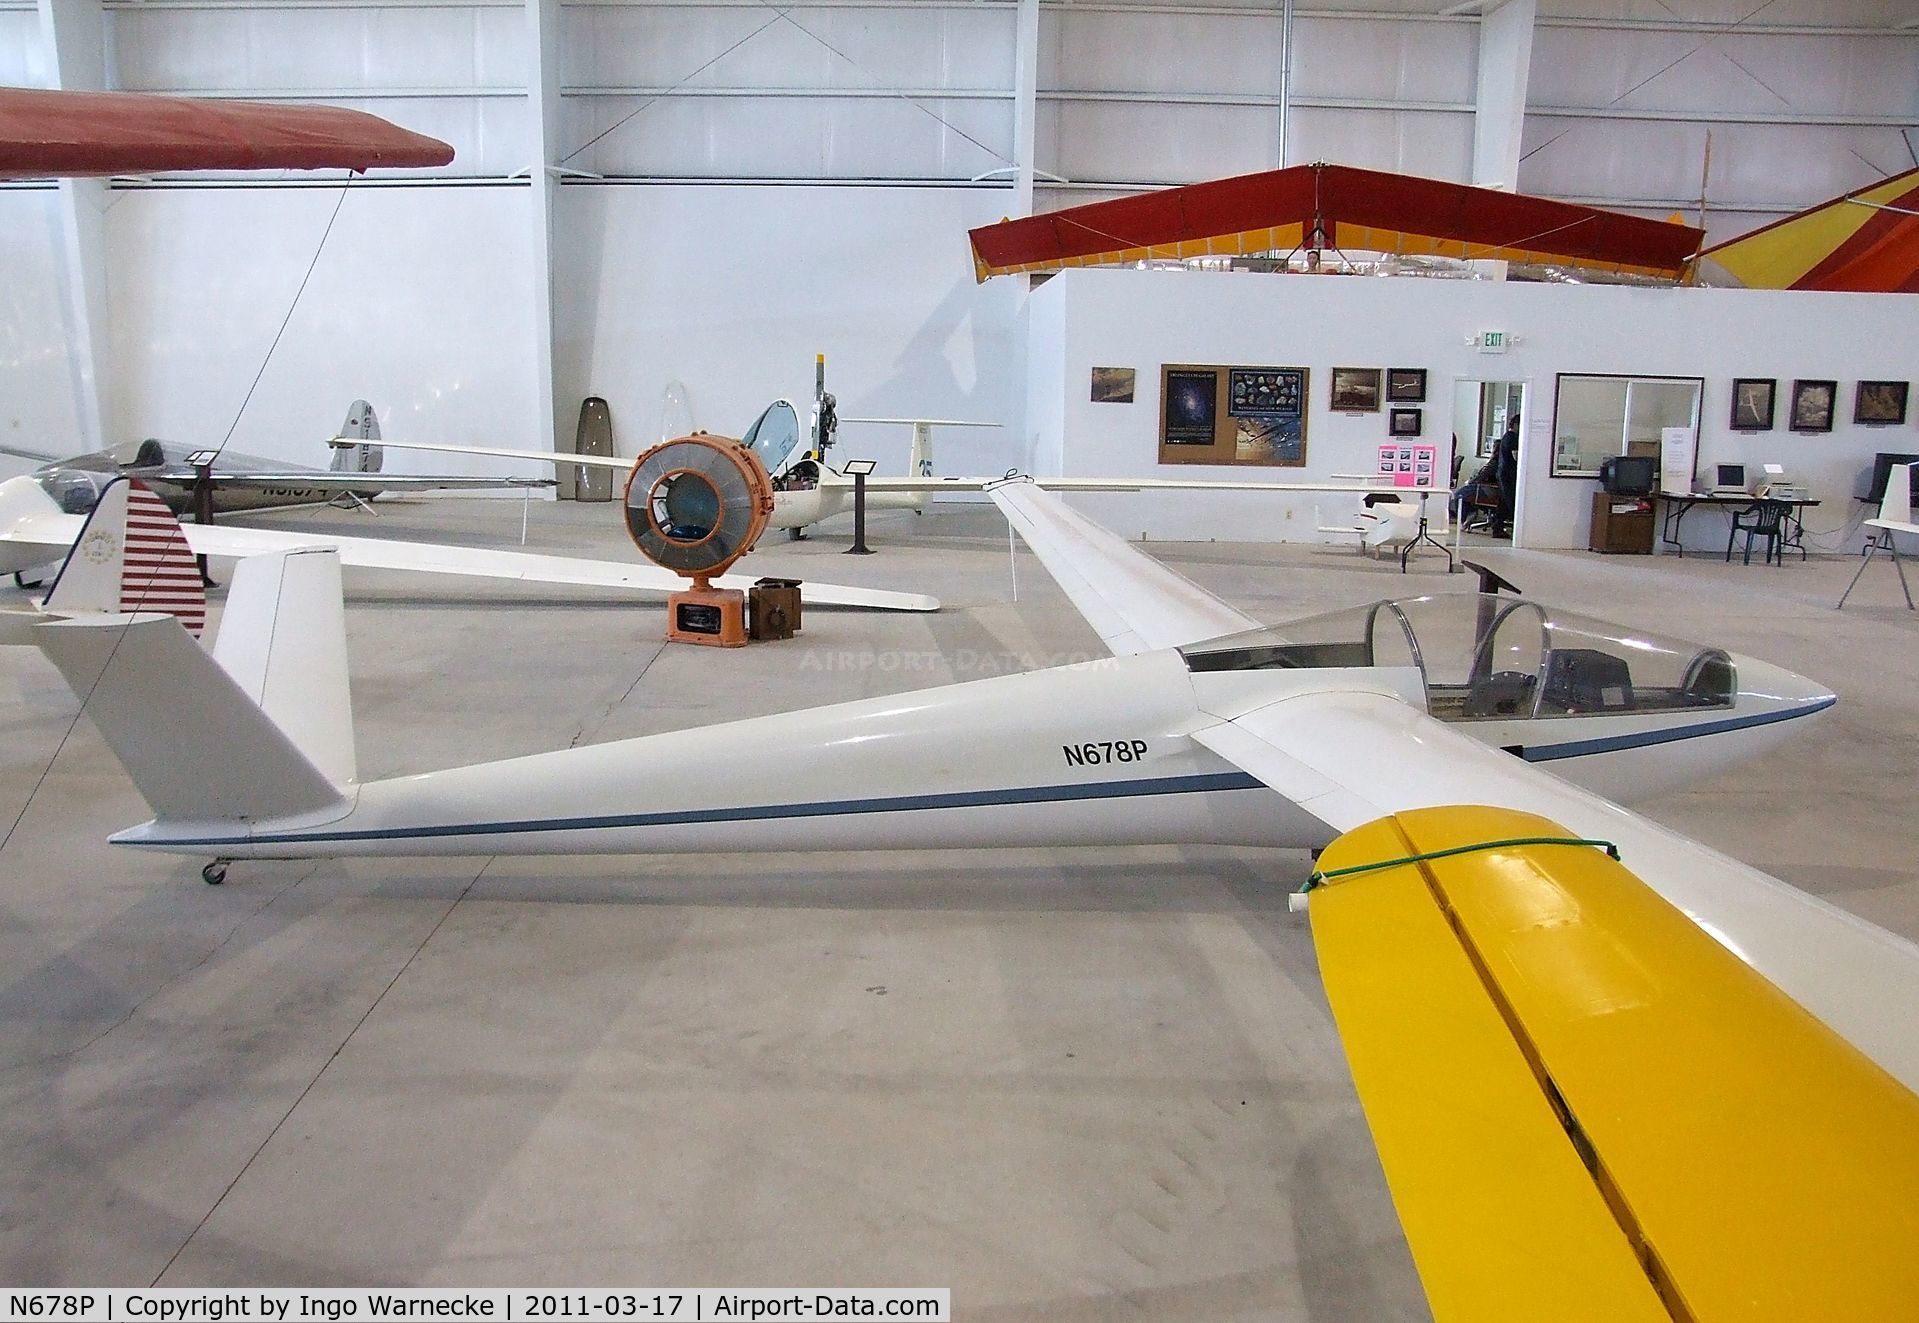 N678P, 1974 Schreder HP-11A C/N 36, Schreder HP-11A at the Southwest Soaring Museum, Moriarty NM